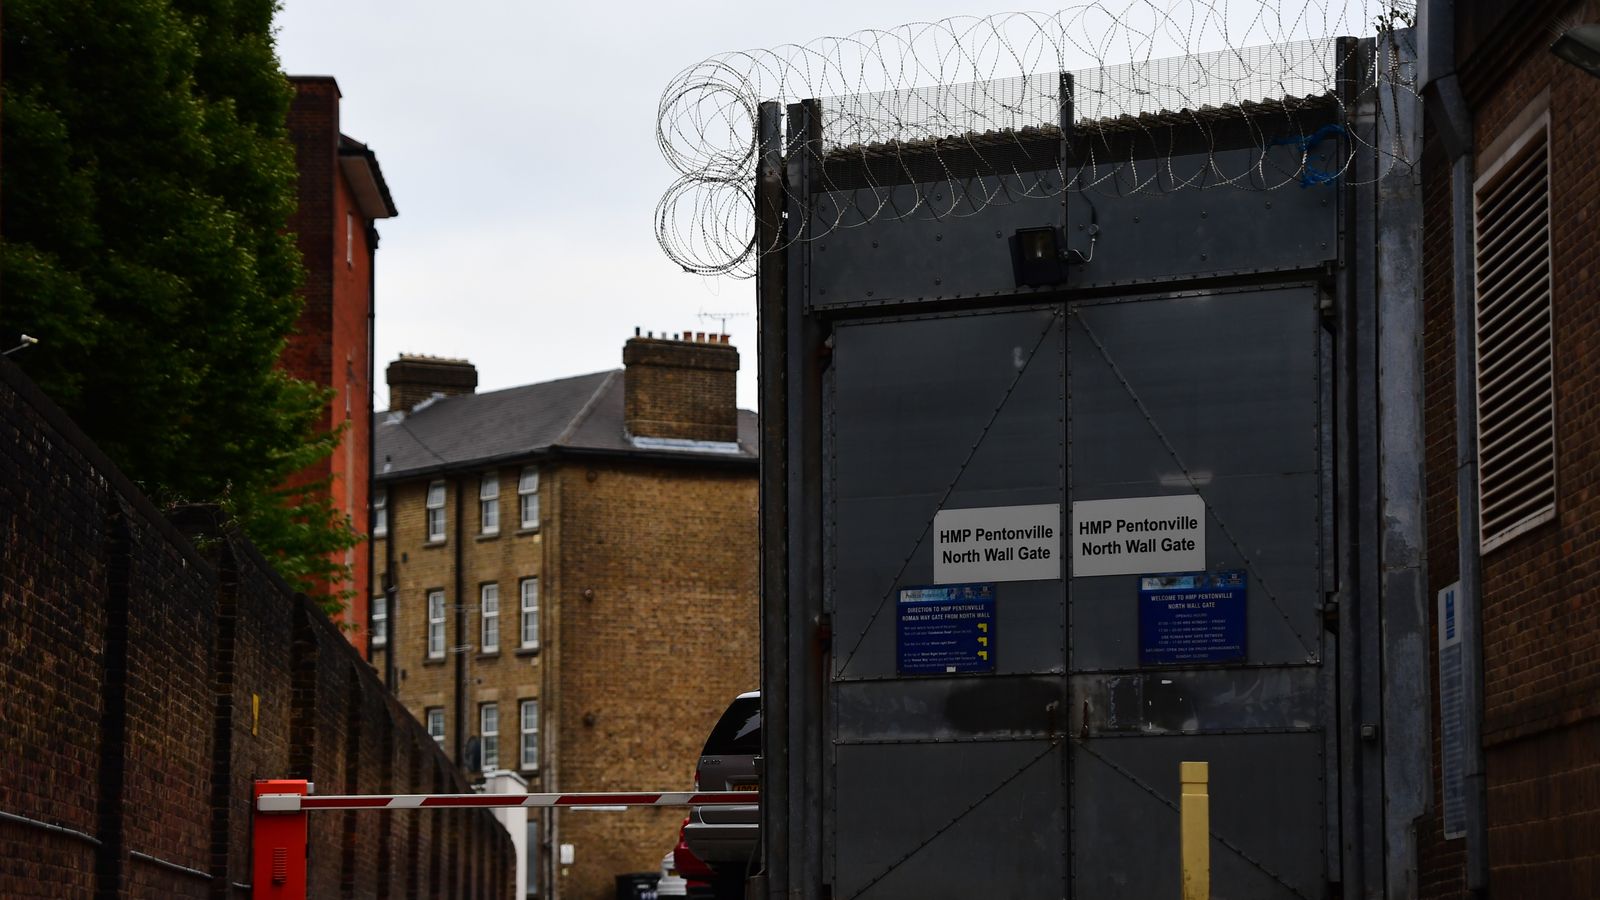 Pentonville prison 'unfit' and 'inhumane' for inmates, report finds